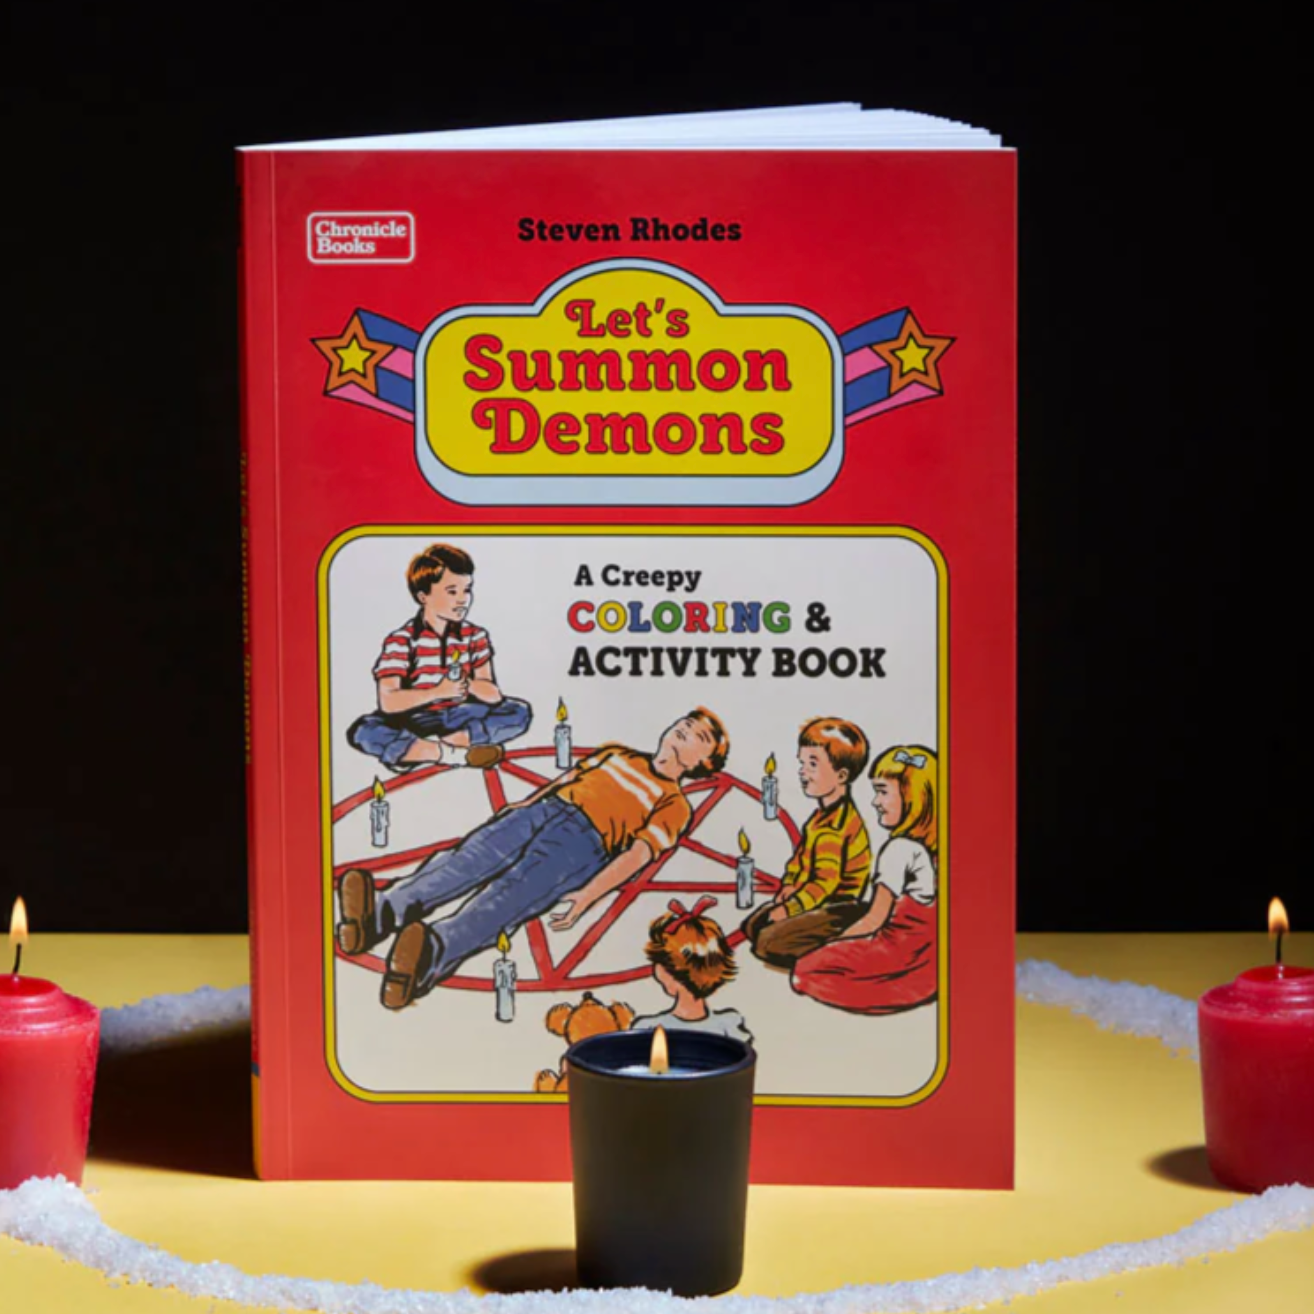 Let's Summon Demons Coloring & Activity Book - 64 pages